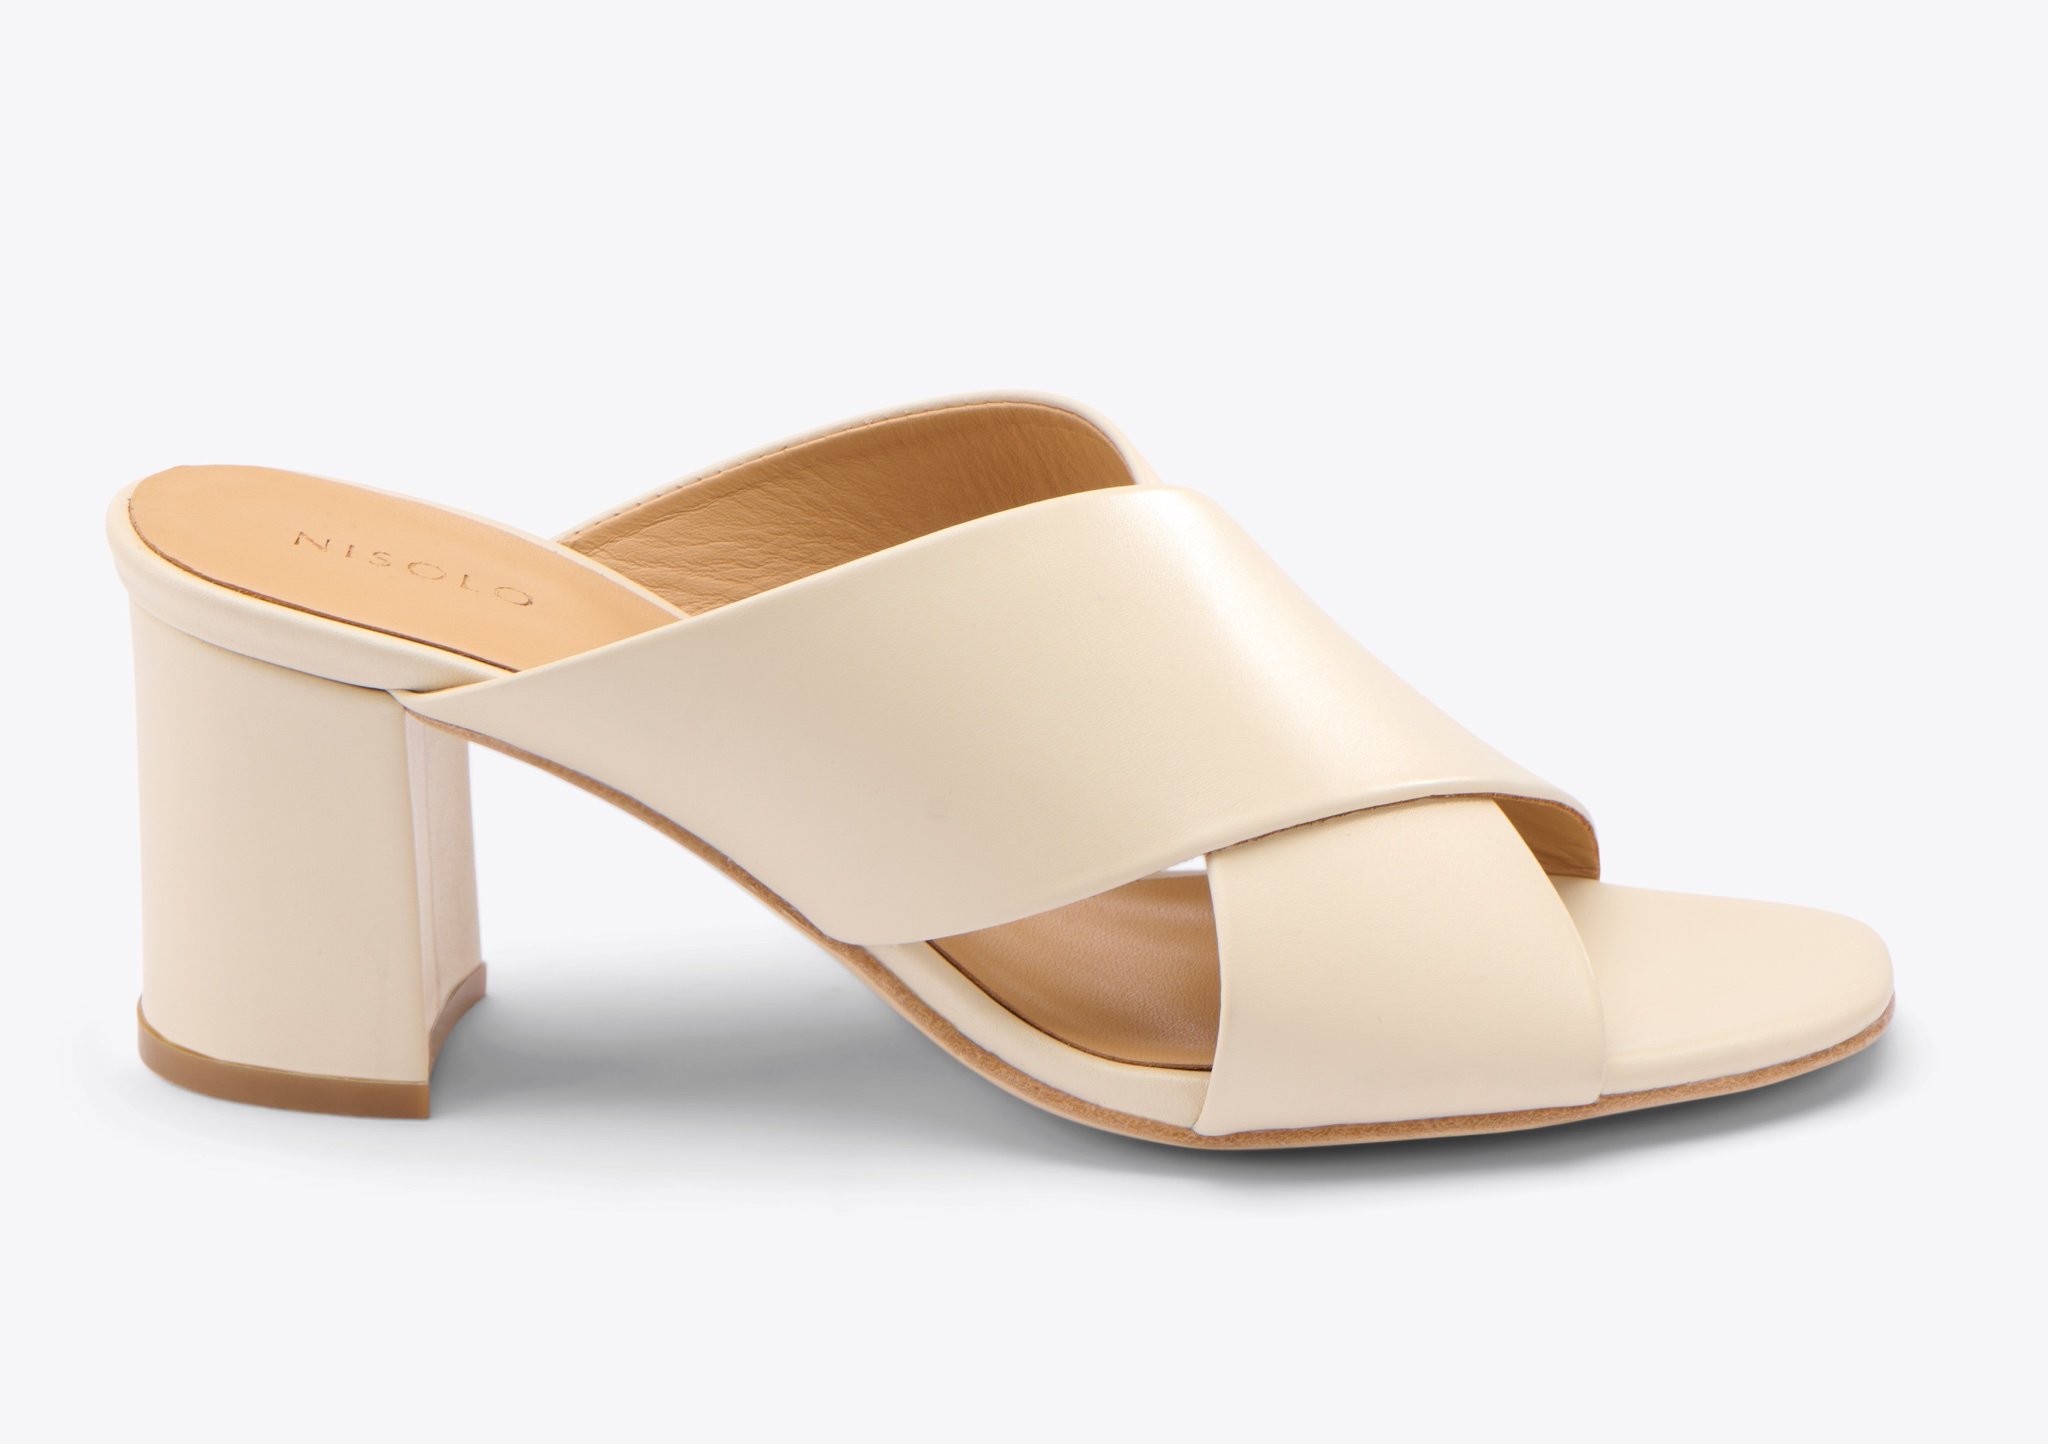 Nisolo Carina Cross Strap Mule Bone - Every Nisolo product is built on the foundation of comfort, function, and design. 